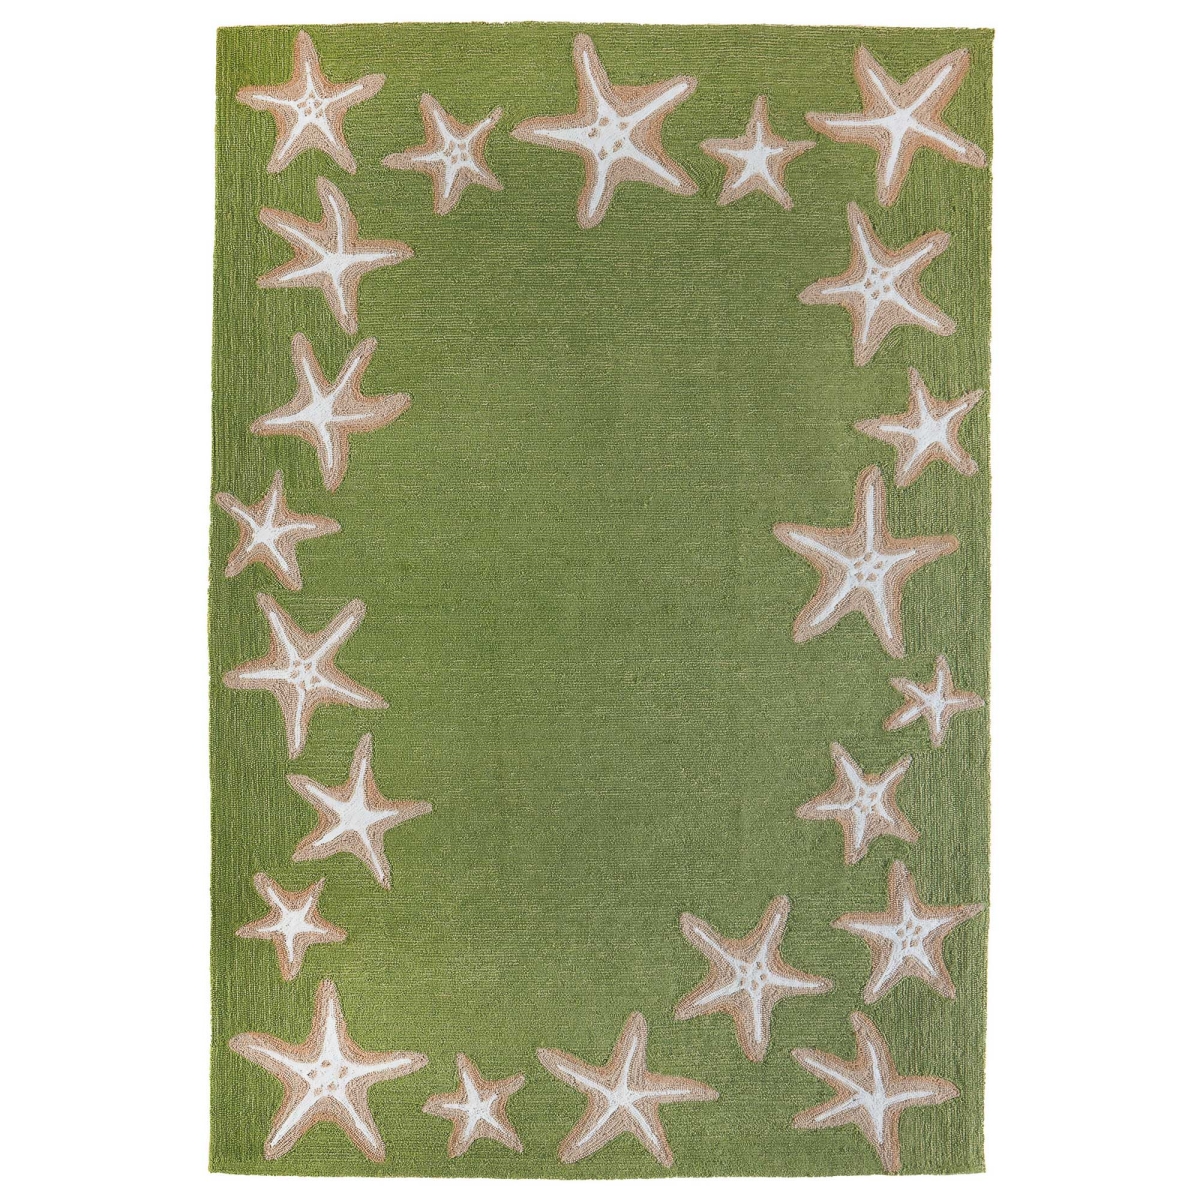 Trans-ocean Imports Cap57171006 5 Ft. X 7 Ft. 6 In. Liora Manne Capri Starfish Border Indoor & Outdoor Hand Tufted Rectangle Rug - Green